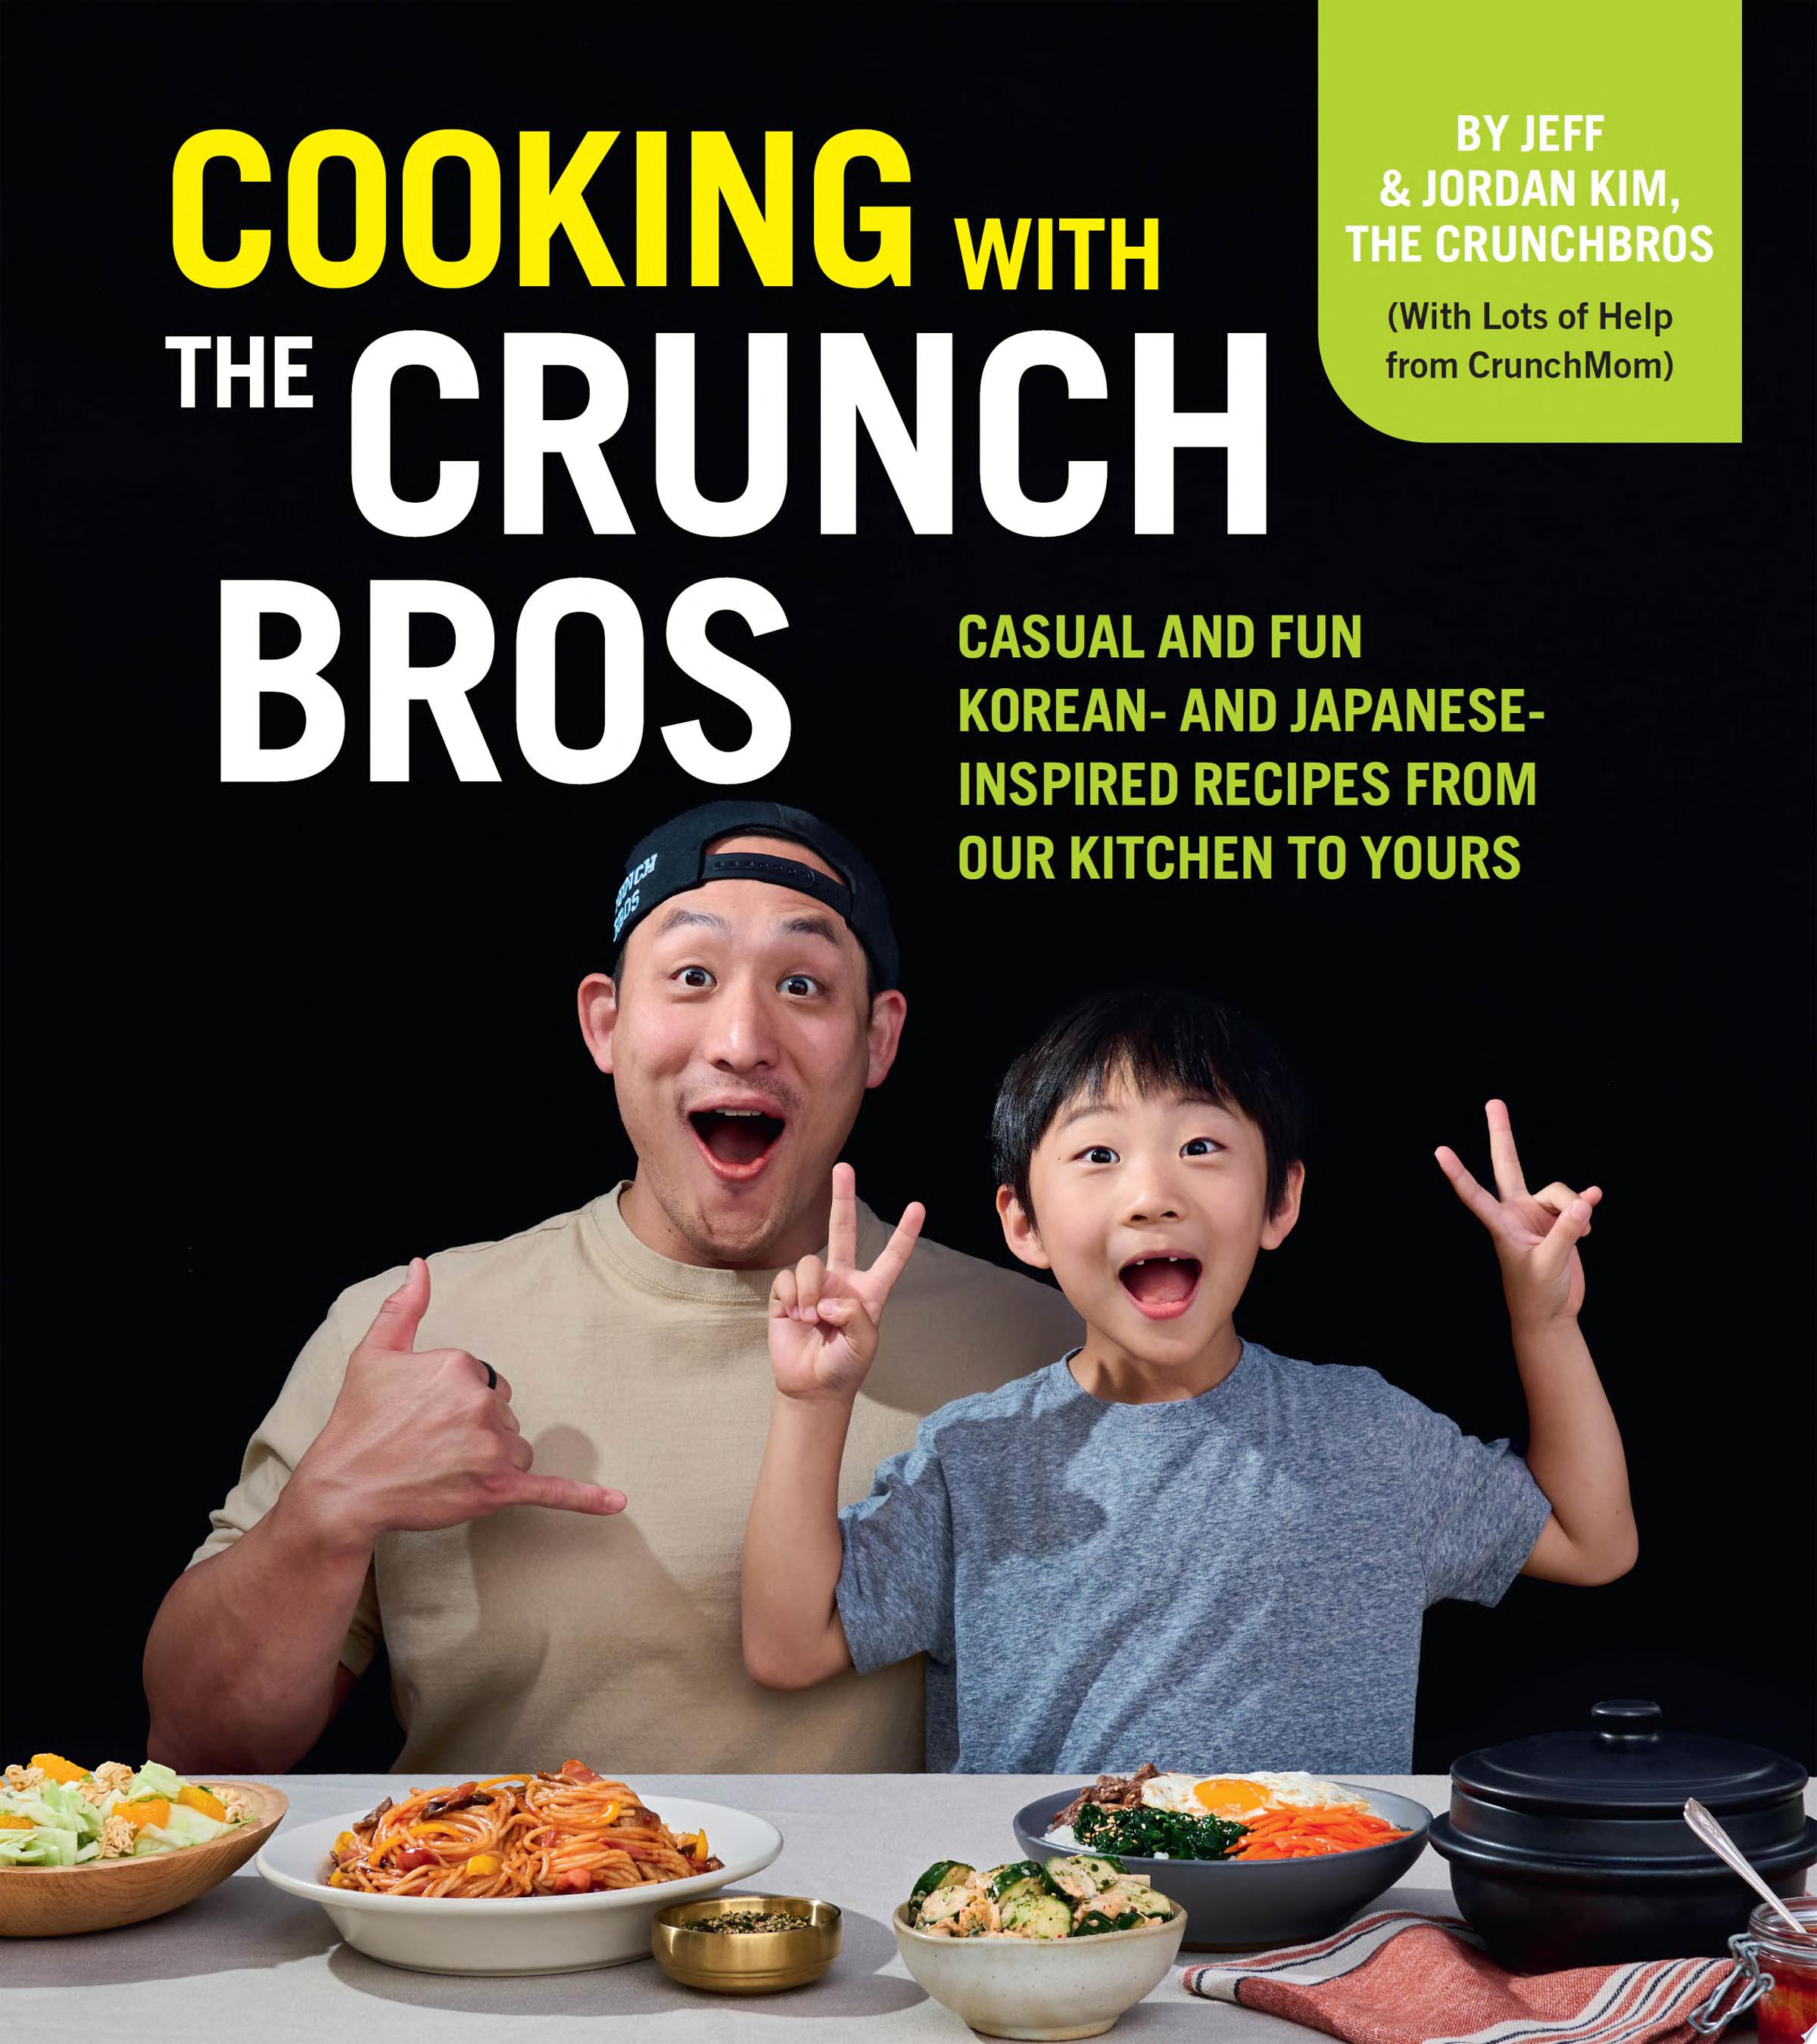 Image for "Cooking with the CrunchBros"